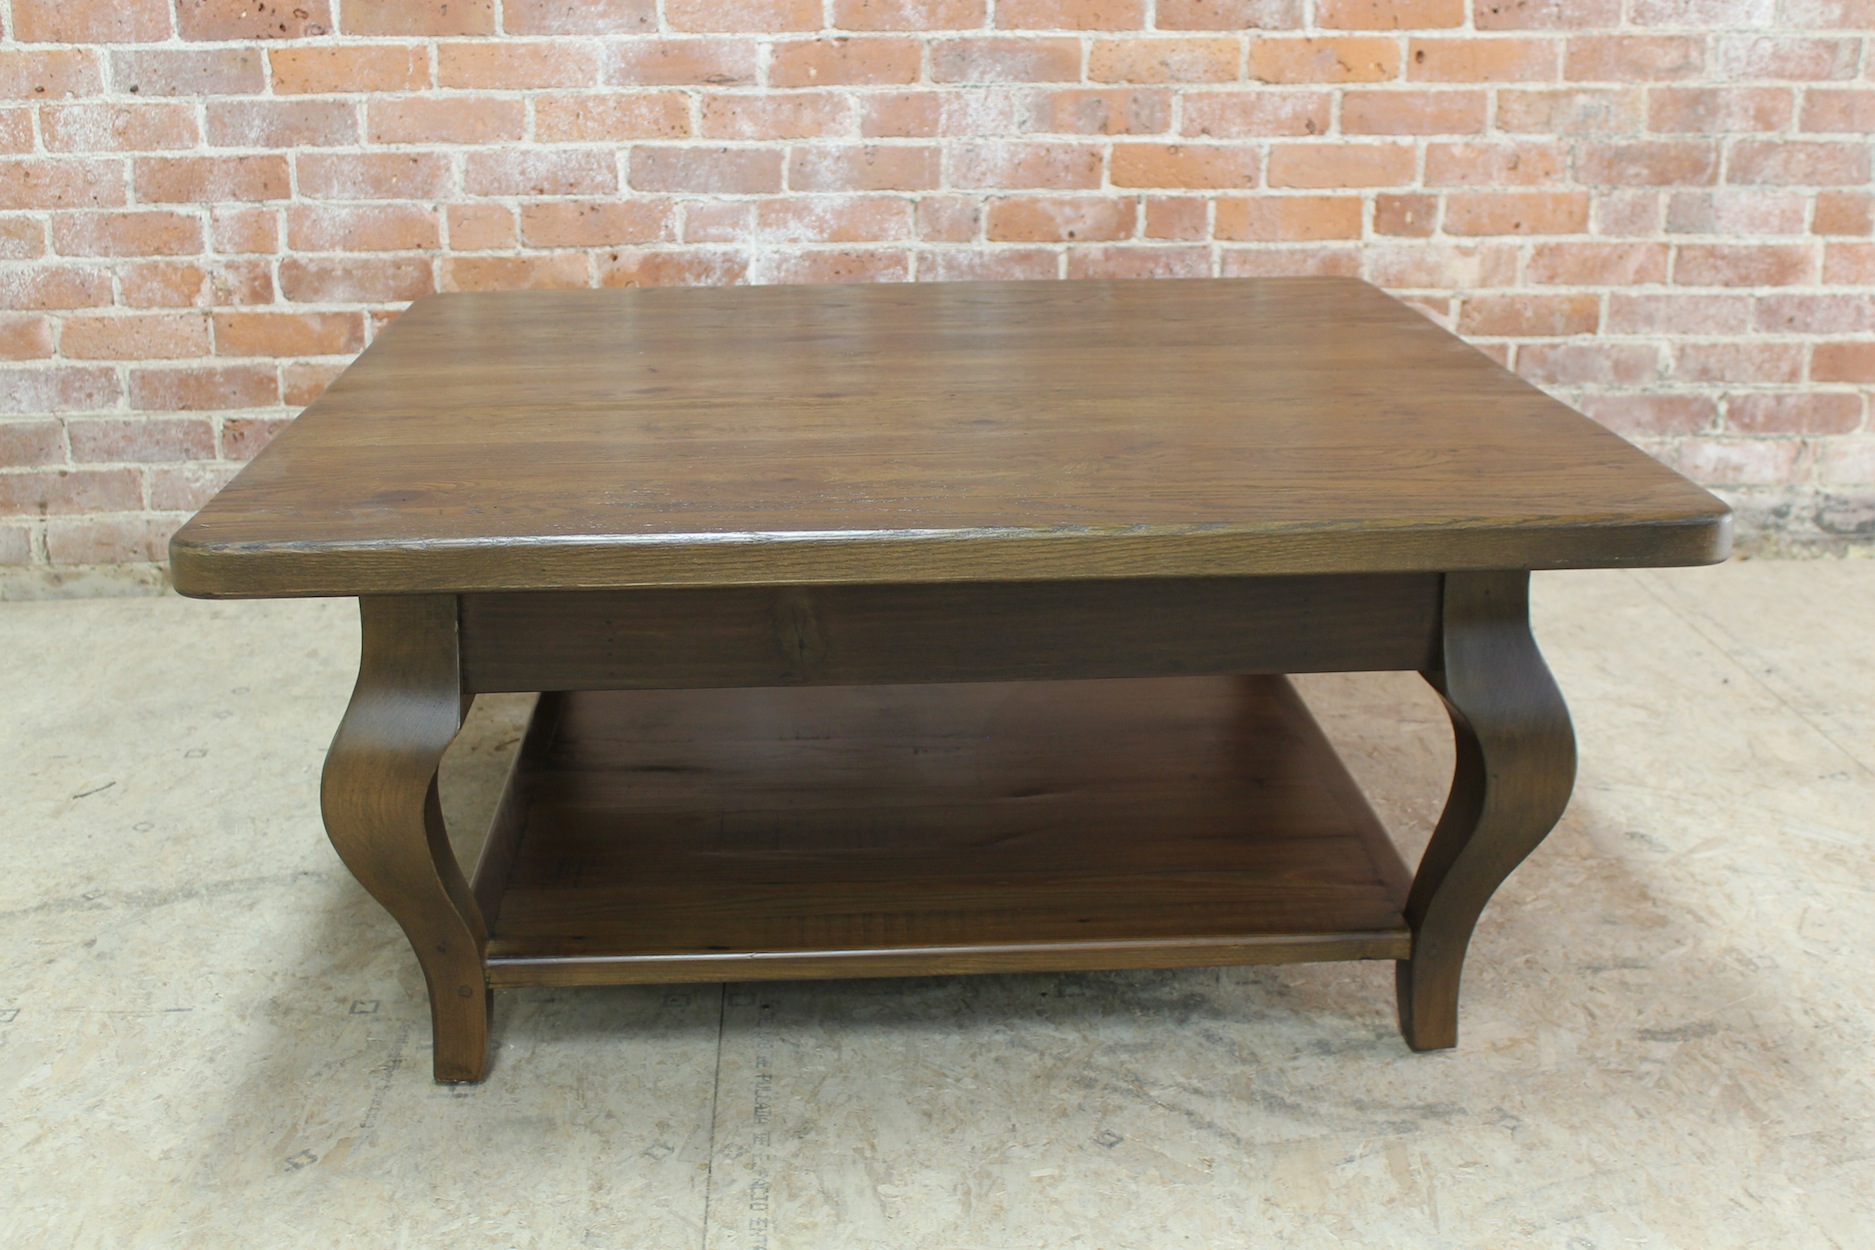 42 inch square kitchen table